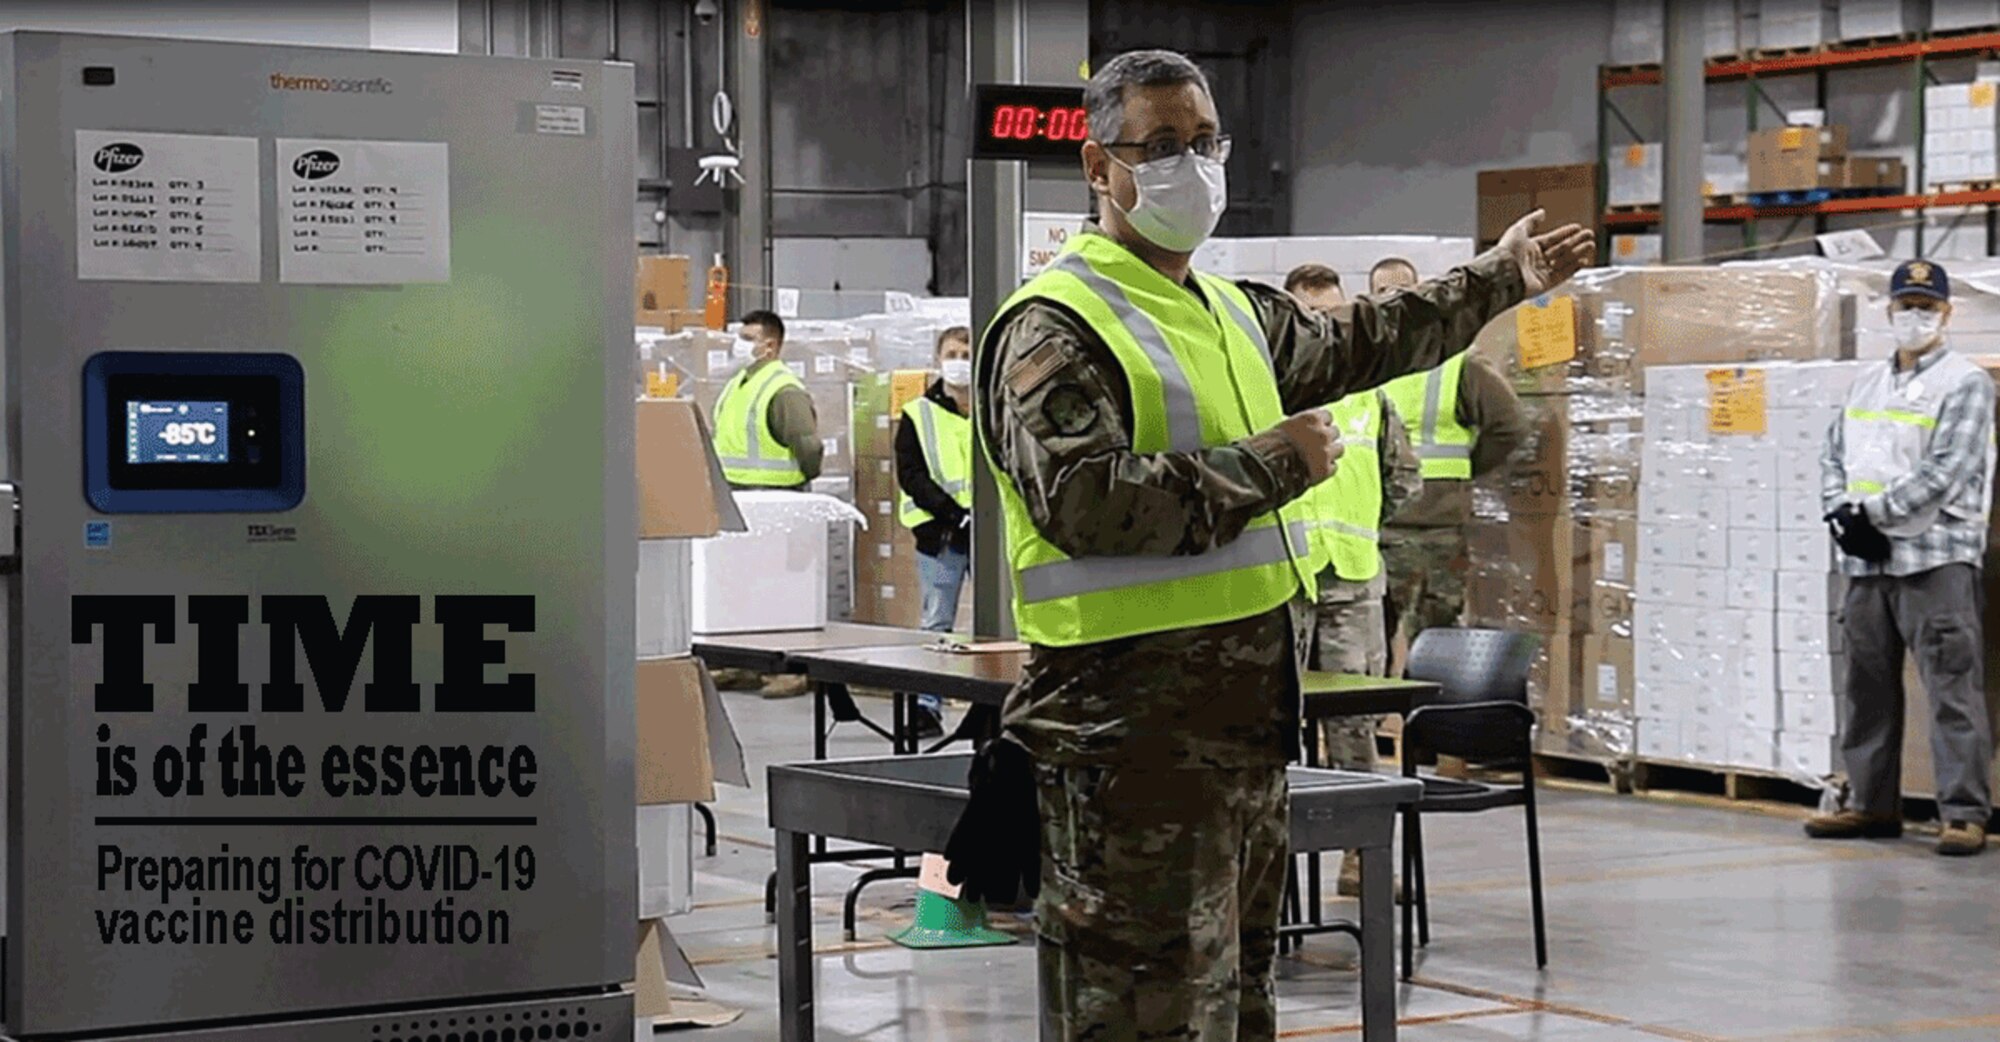 Ohio Air National Guard Senior Master Sgt. Gregory Sprowls explains the process of receiving and repacking COVID-19 vaccines. Sprowls, an air transportation specialist with the 121st Air Refueling Wing in Columbus, Ohio, said his military skills have helped in working with partners from the Ohio Department of Health to develop the logistics plan for the vaccines the state will soon have at its Receive, Store and Stage warehouse.